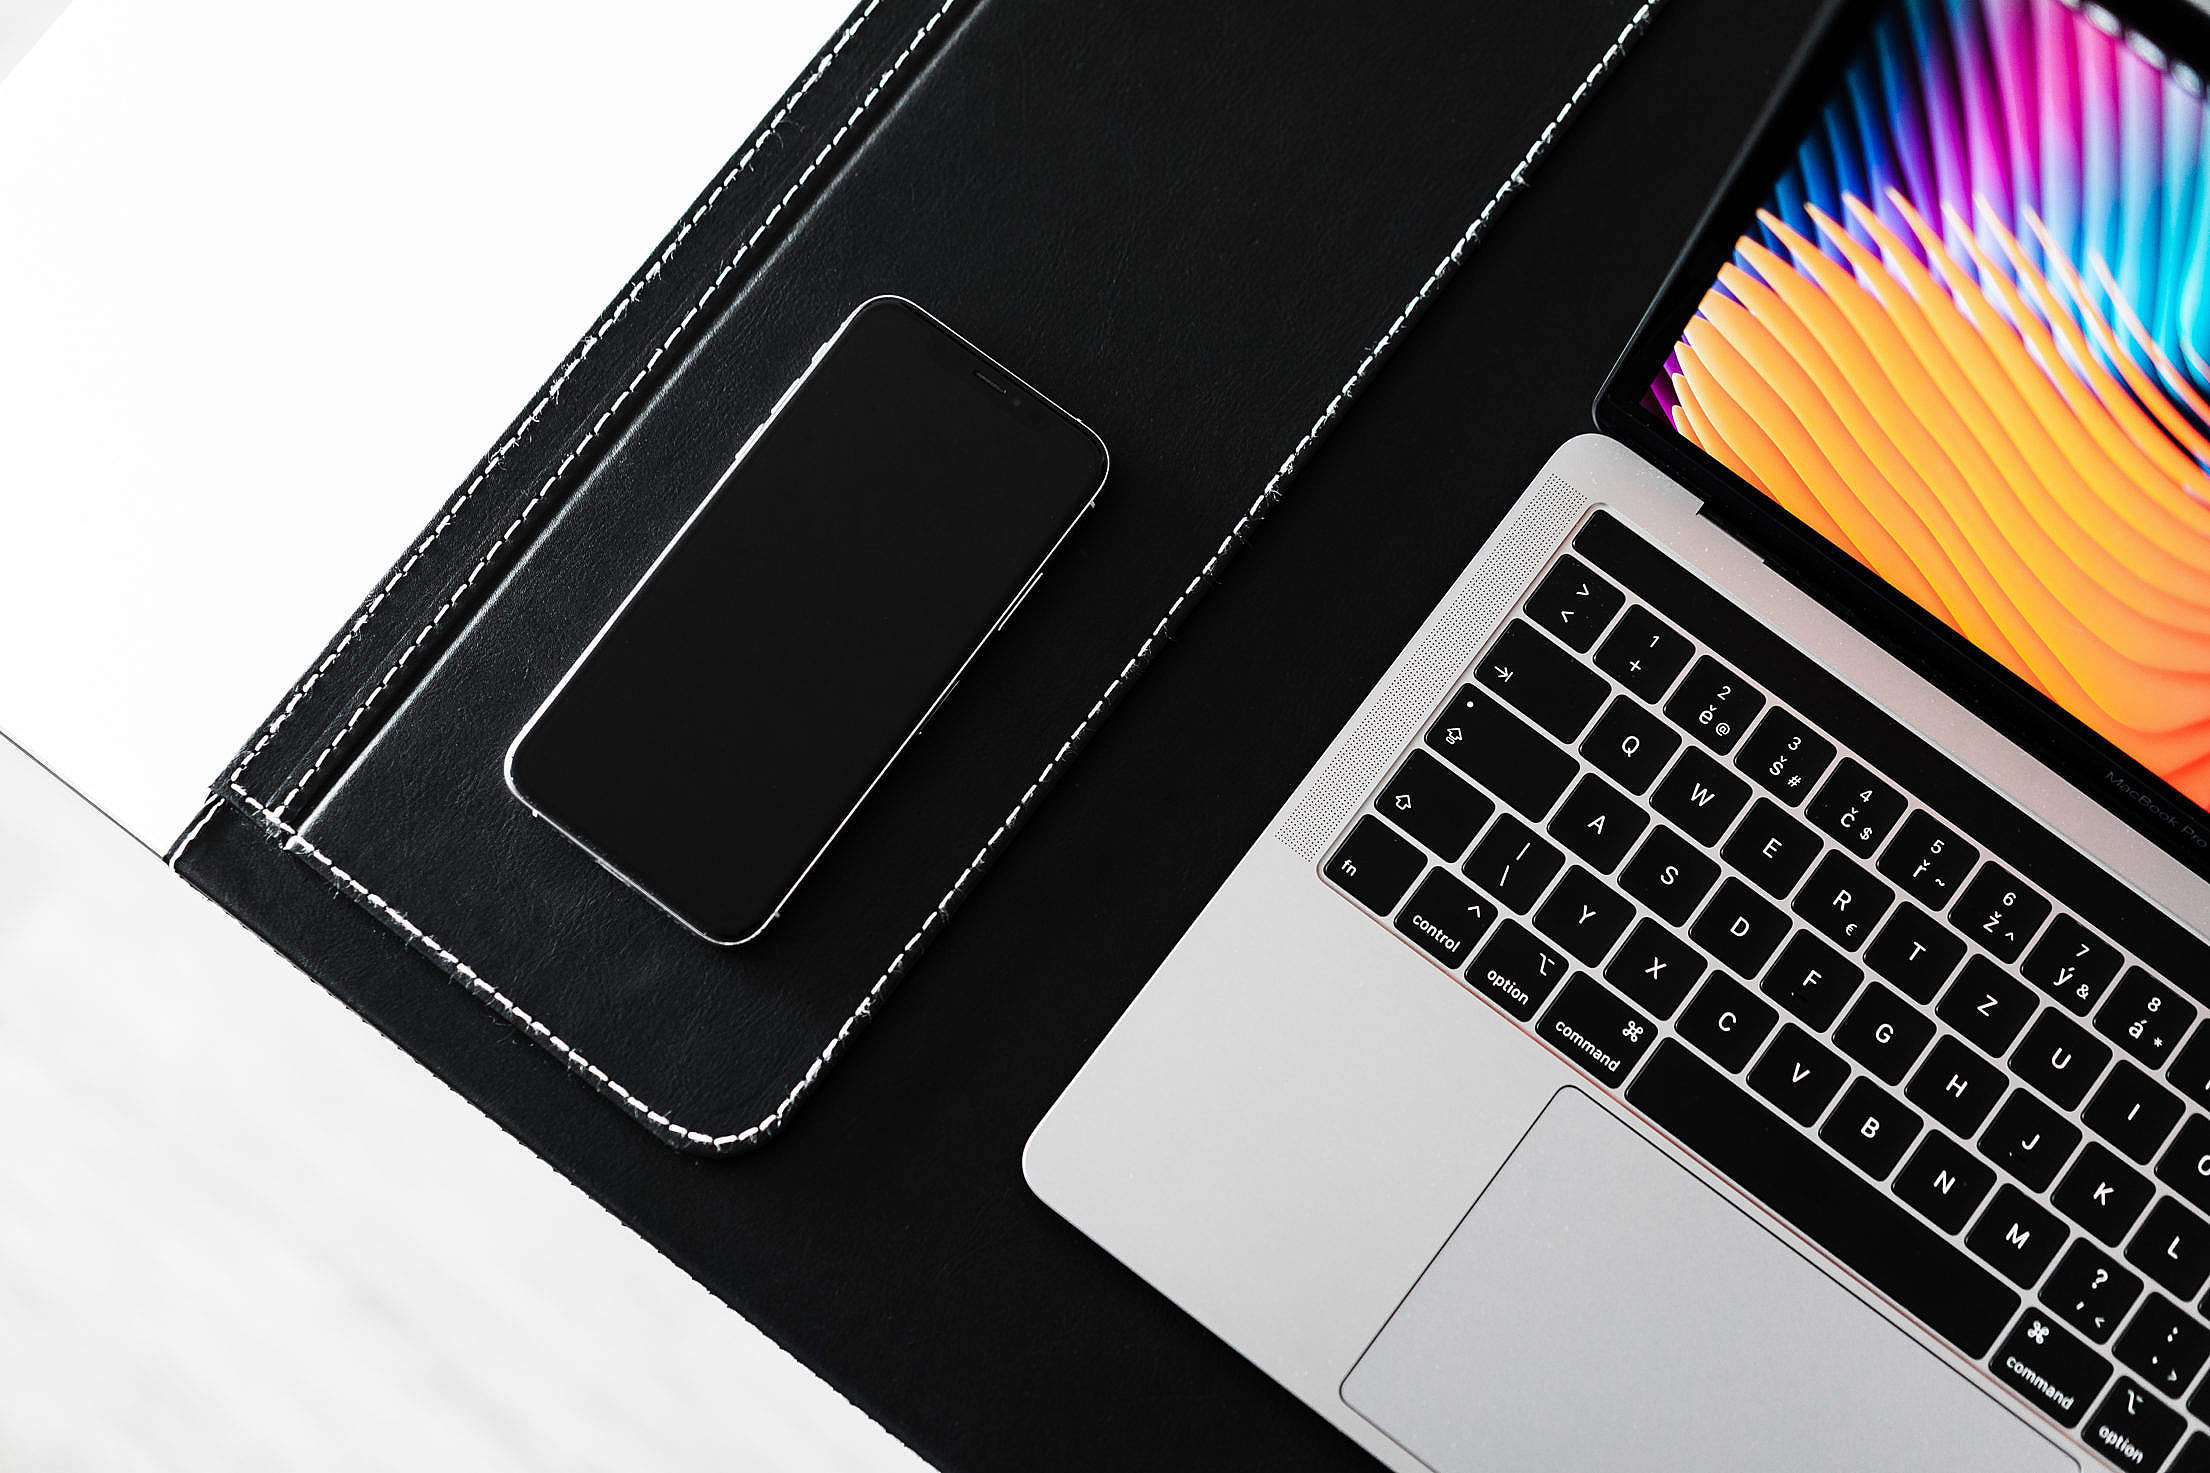 Modern Laptop with Smartphone 2019 Free Stock Photo